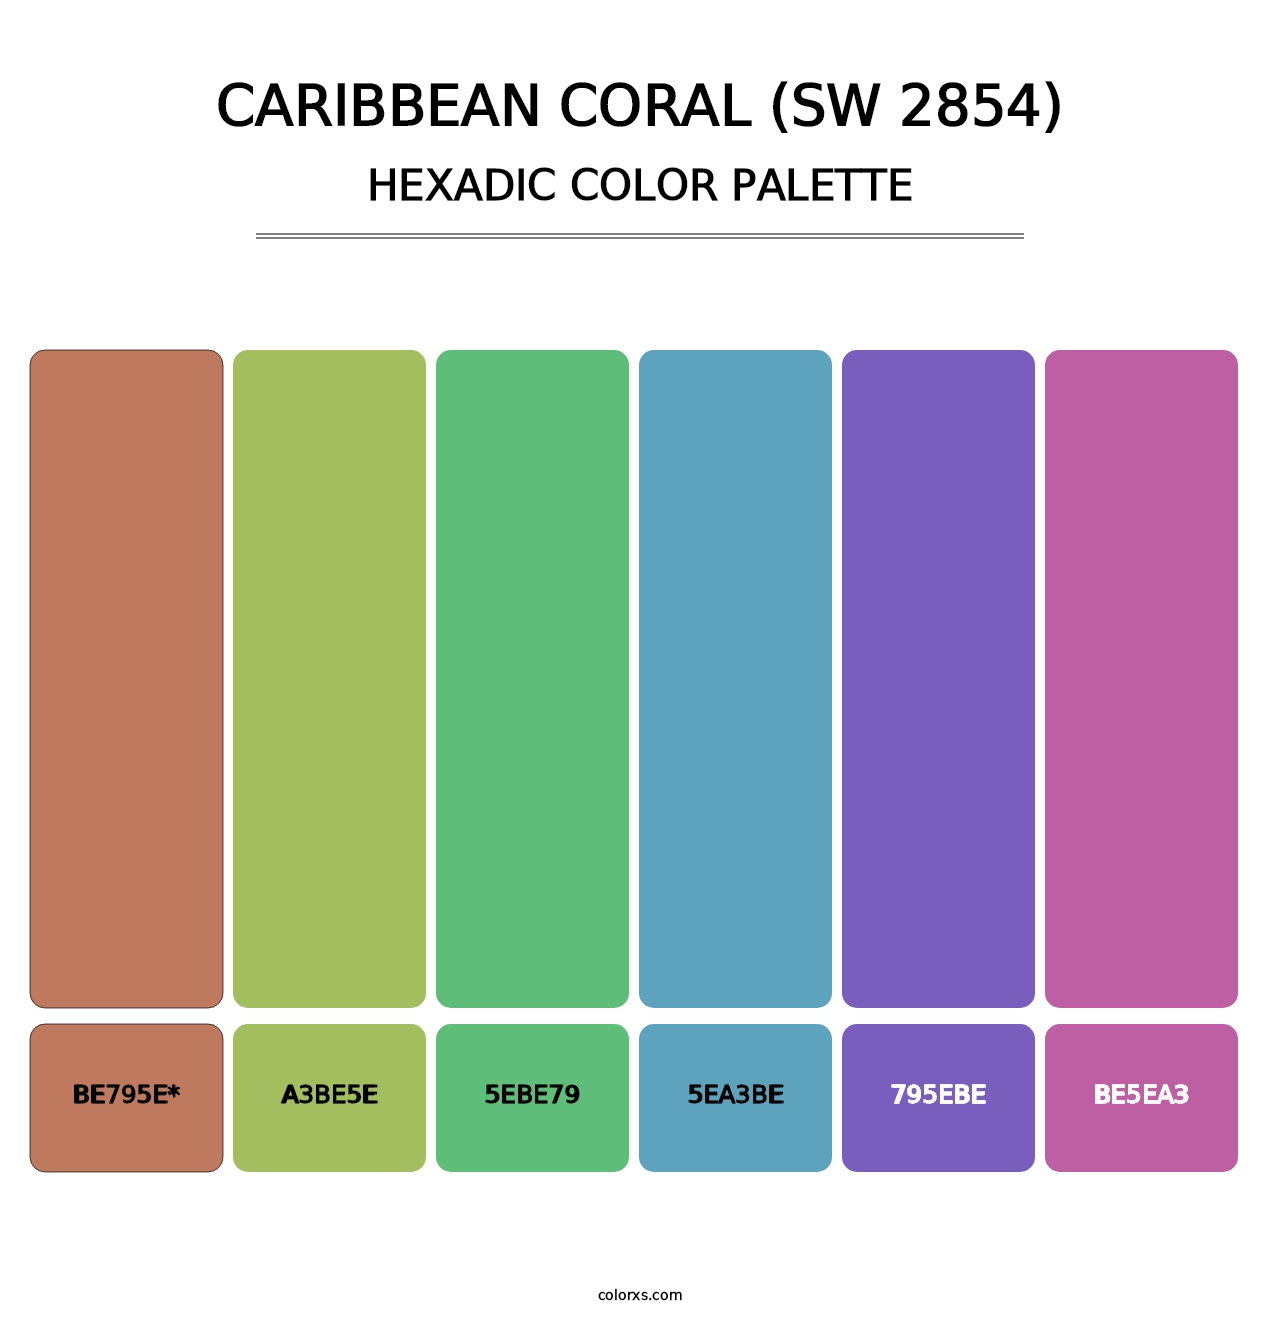 Caribbean Coral (SW 2854) - Hexadic Color Palette